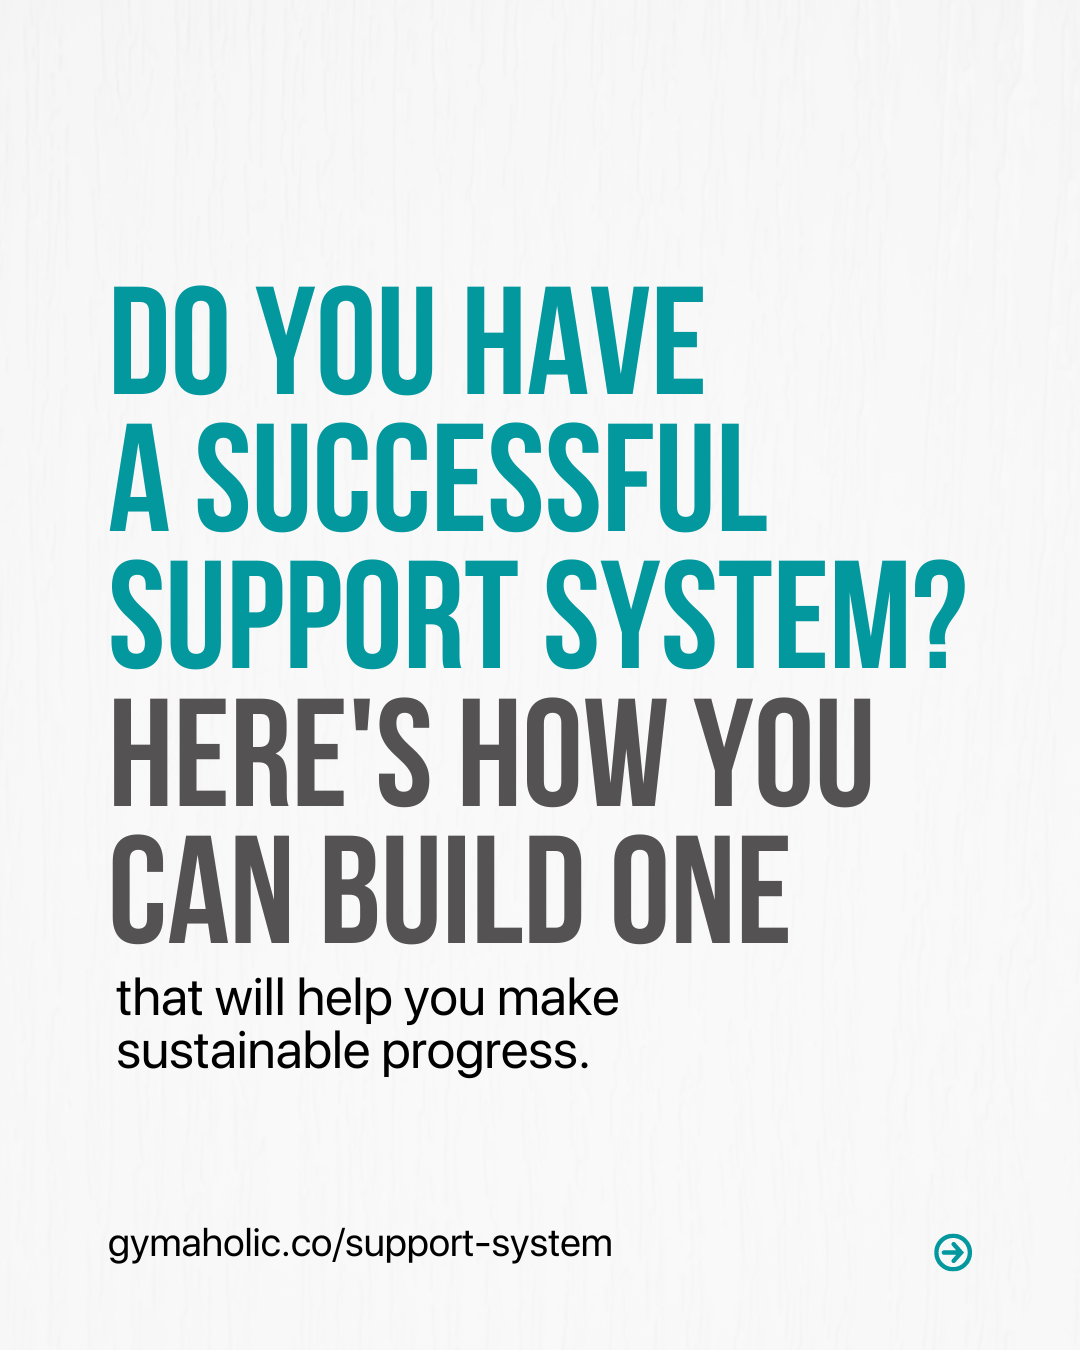 Do you have a successful support system? Here’s how you can build one